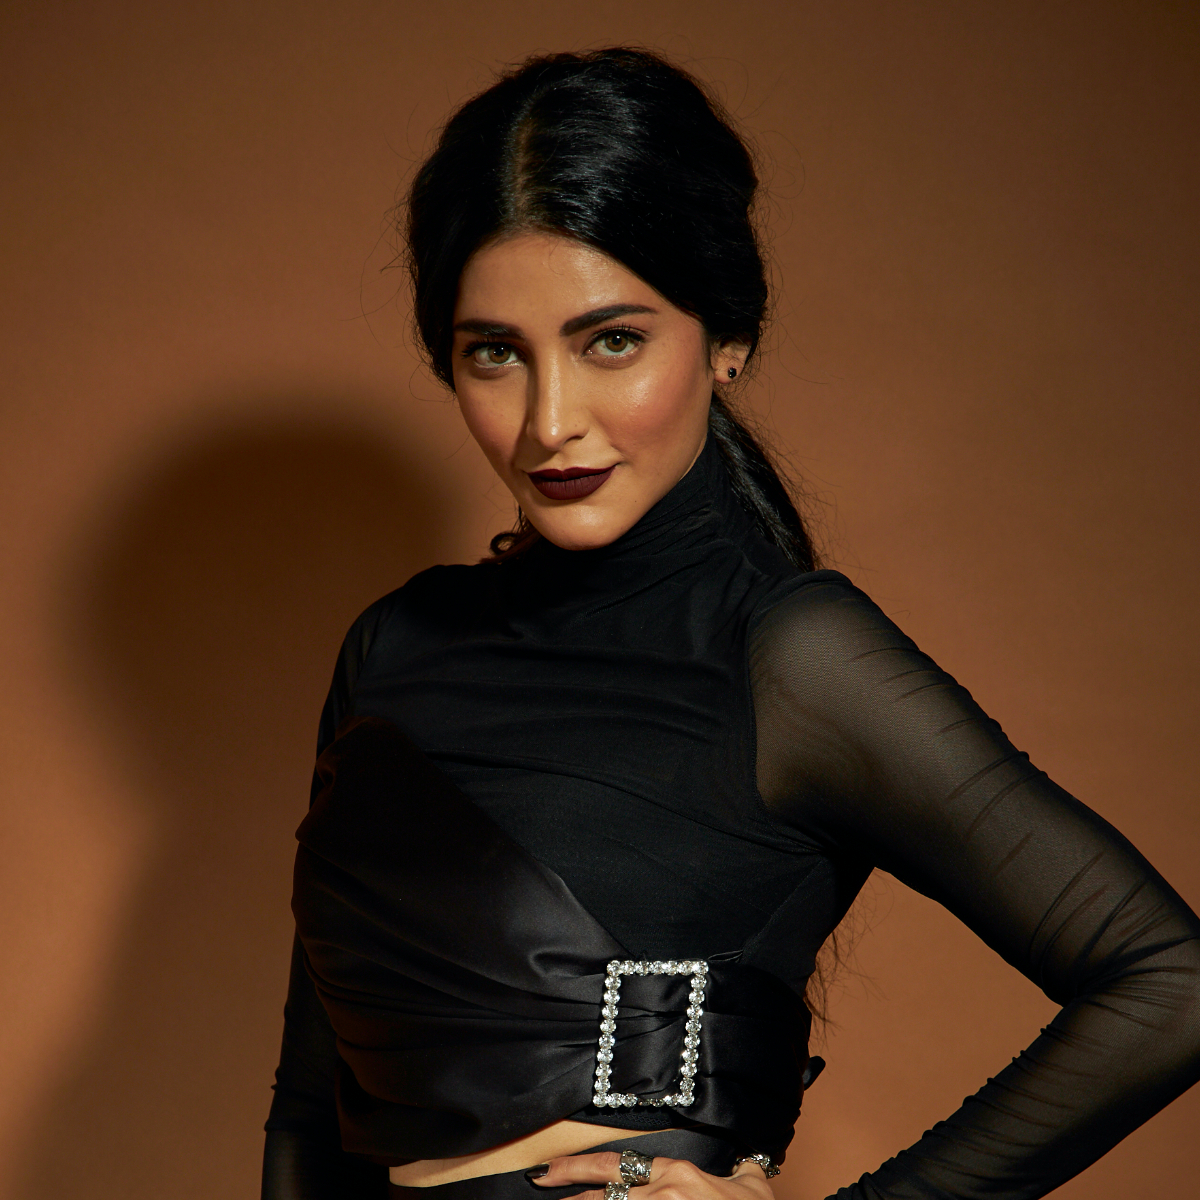 EXCLUSIVE: Shruti Haasan to launch a new single soon; Plans to come out with a book of her poems too